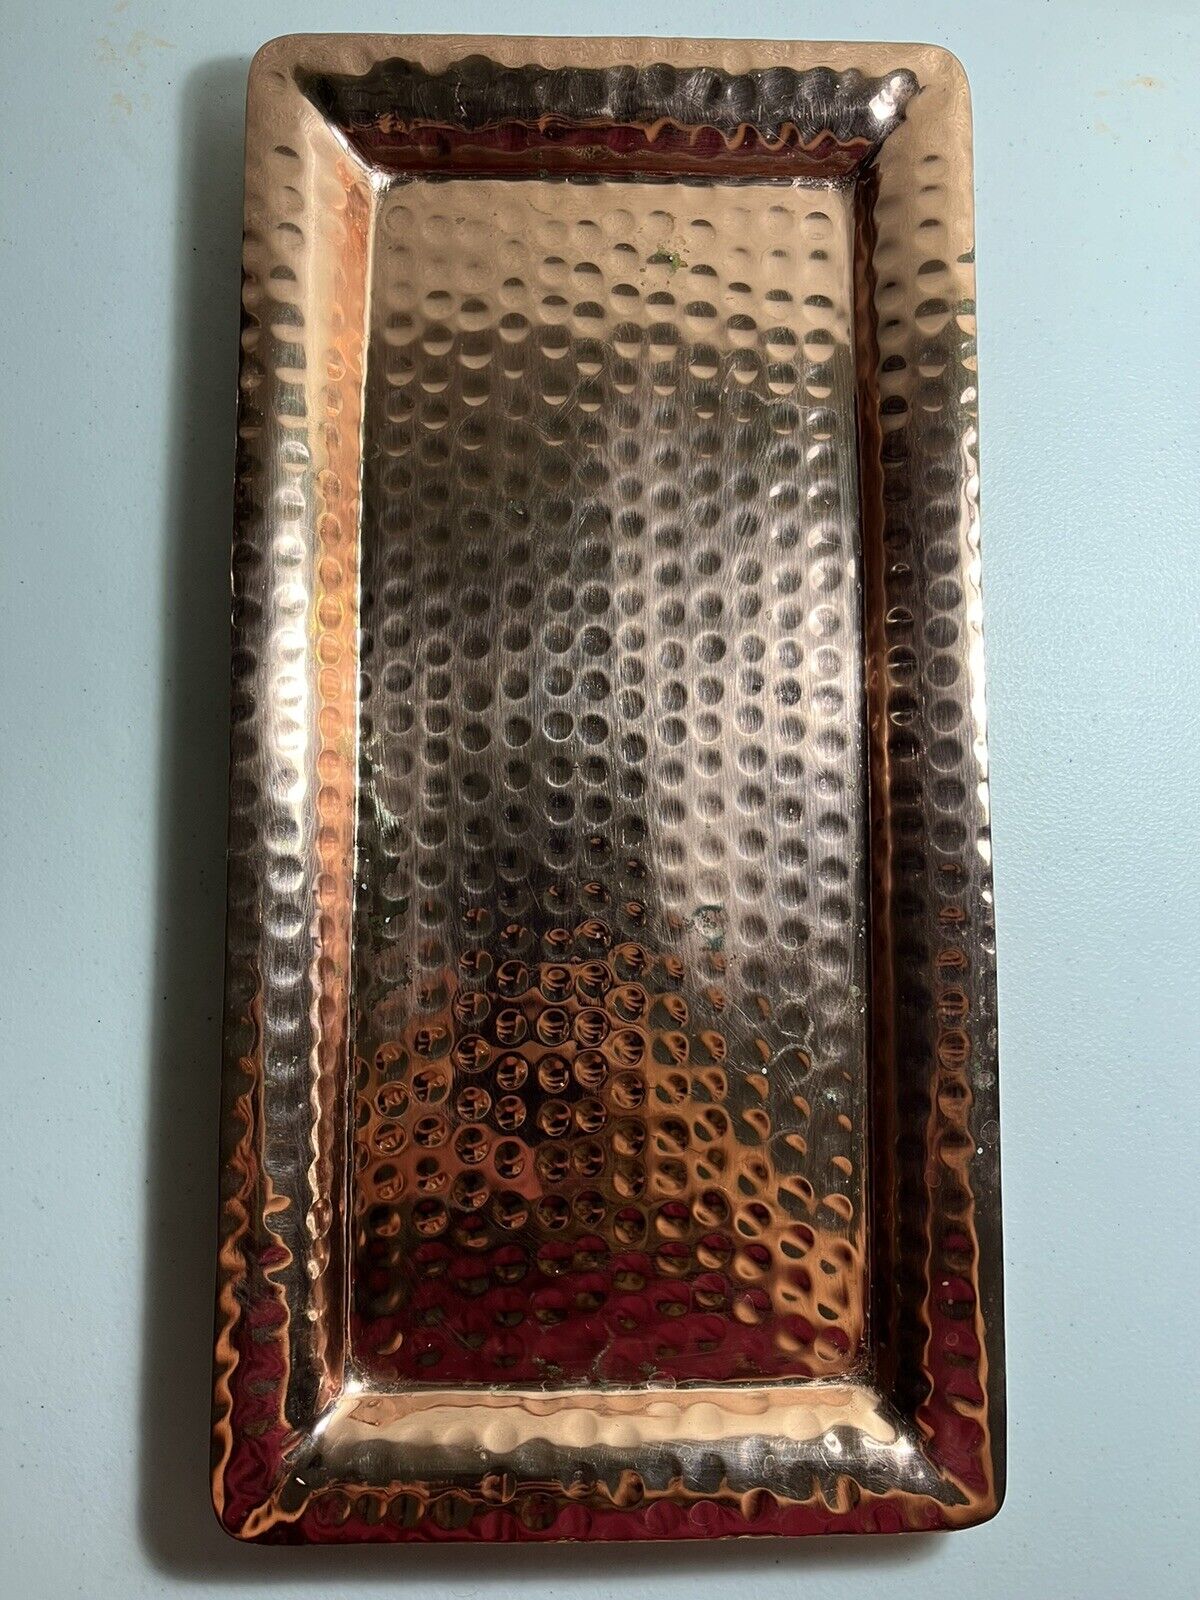 Gently used rectangle hammered copper tray with raised edge - Monarch Abode